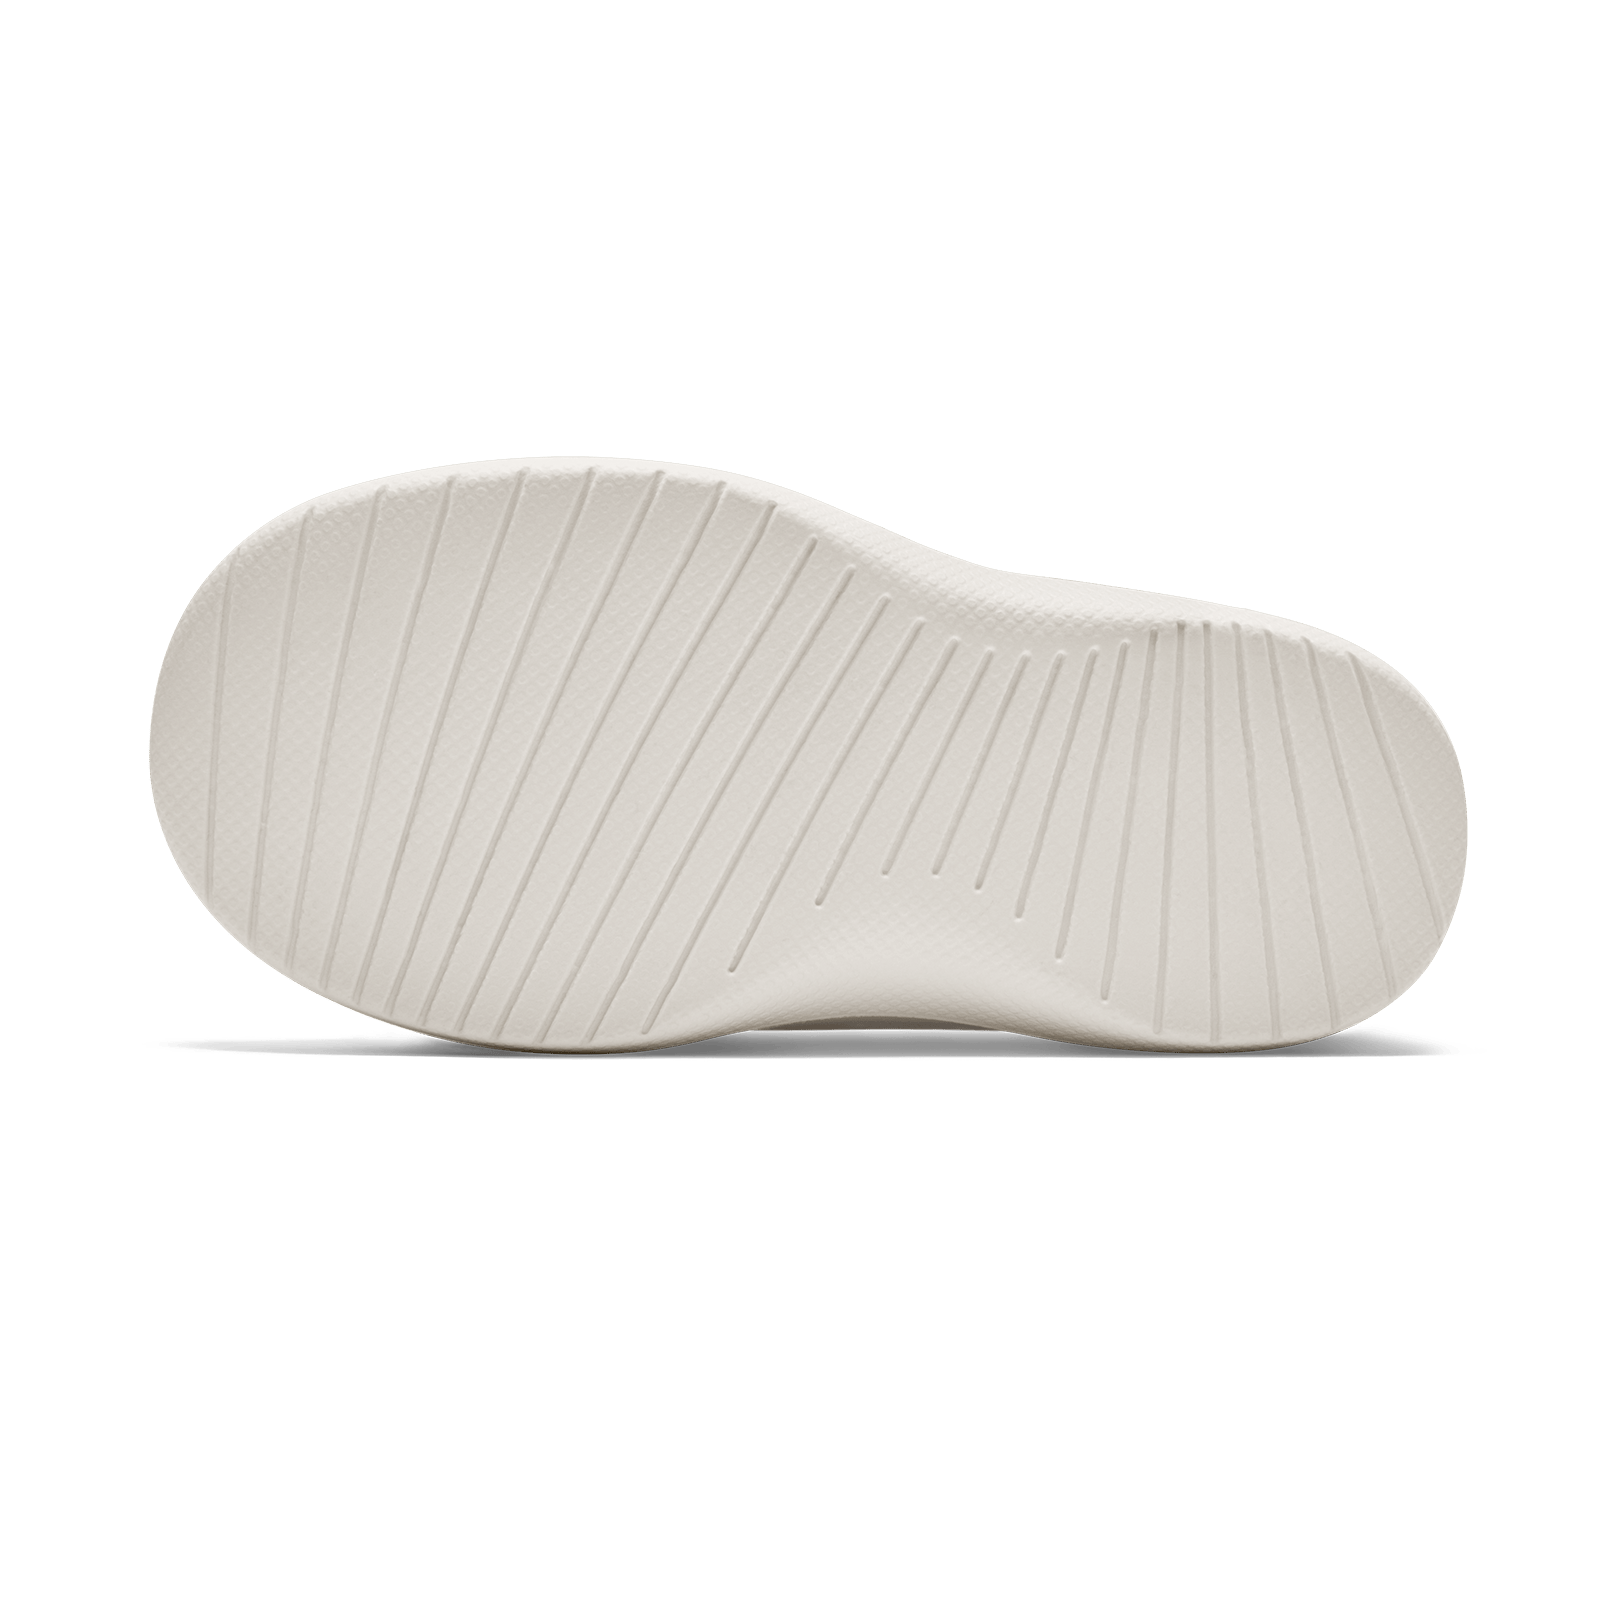 Smallbirds Wool Runners - Little Kids - Natural White (Natural White Sole)